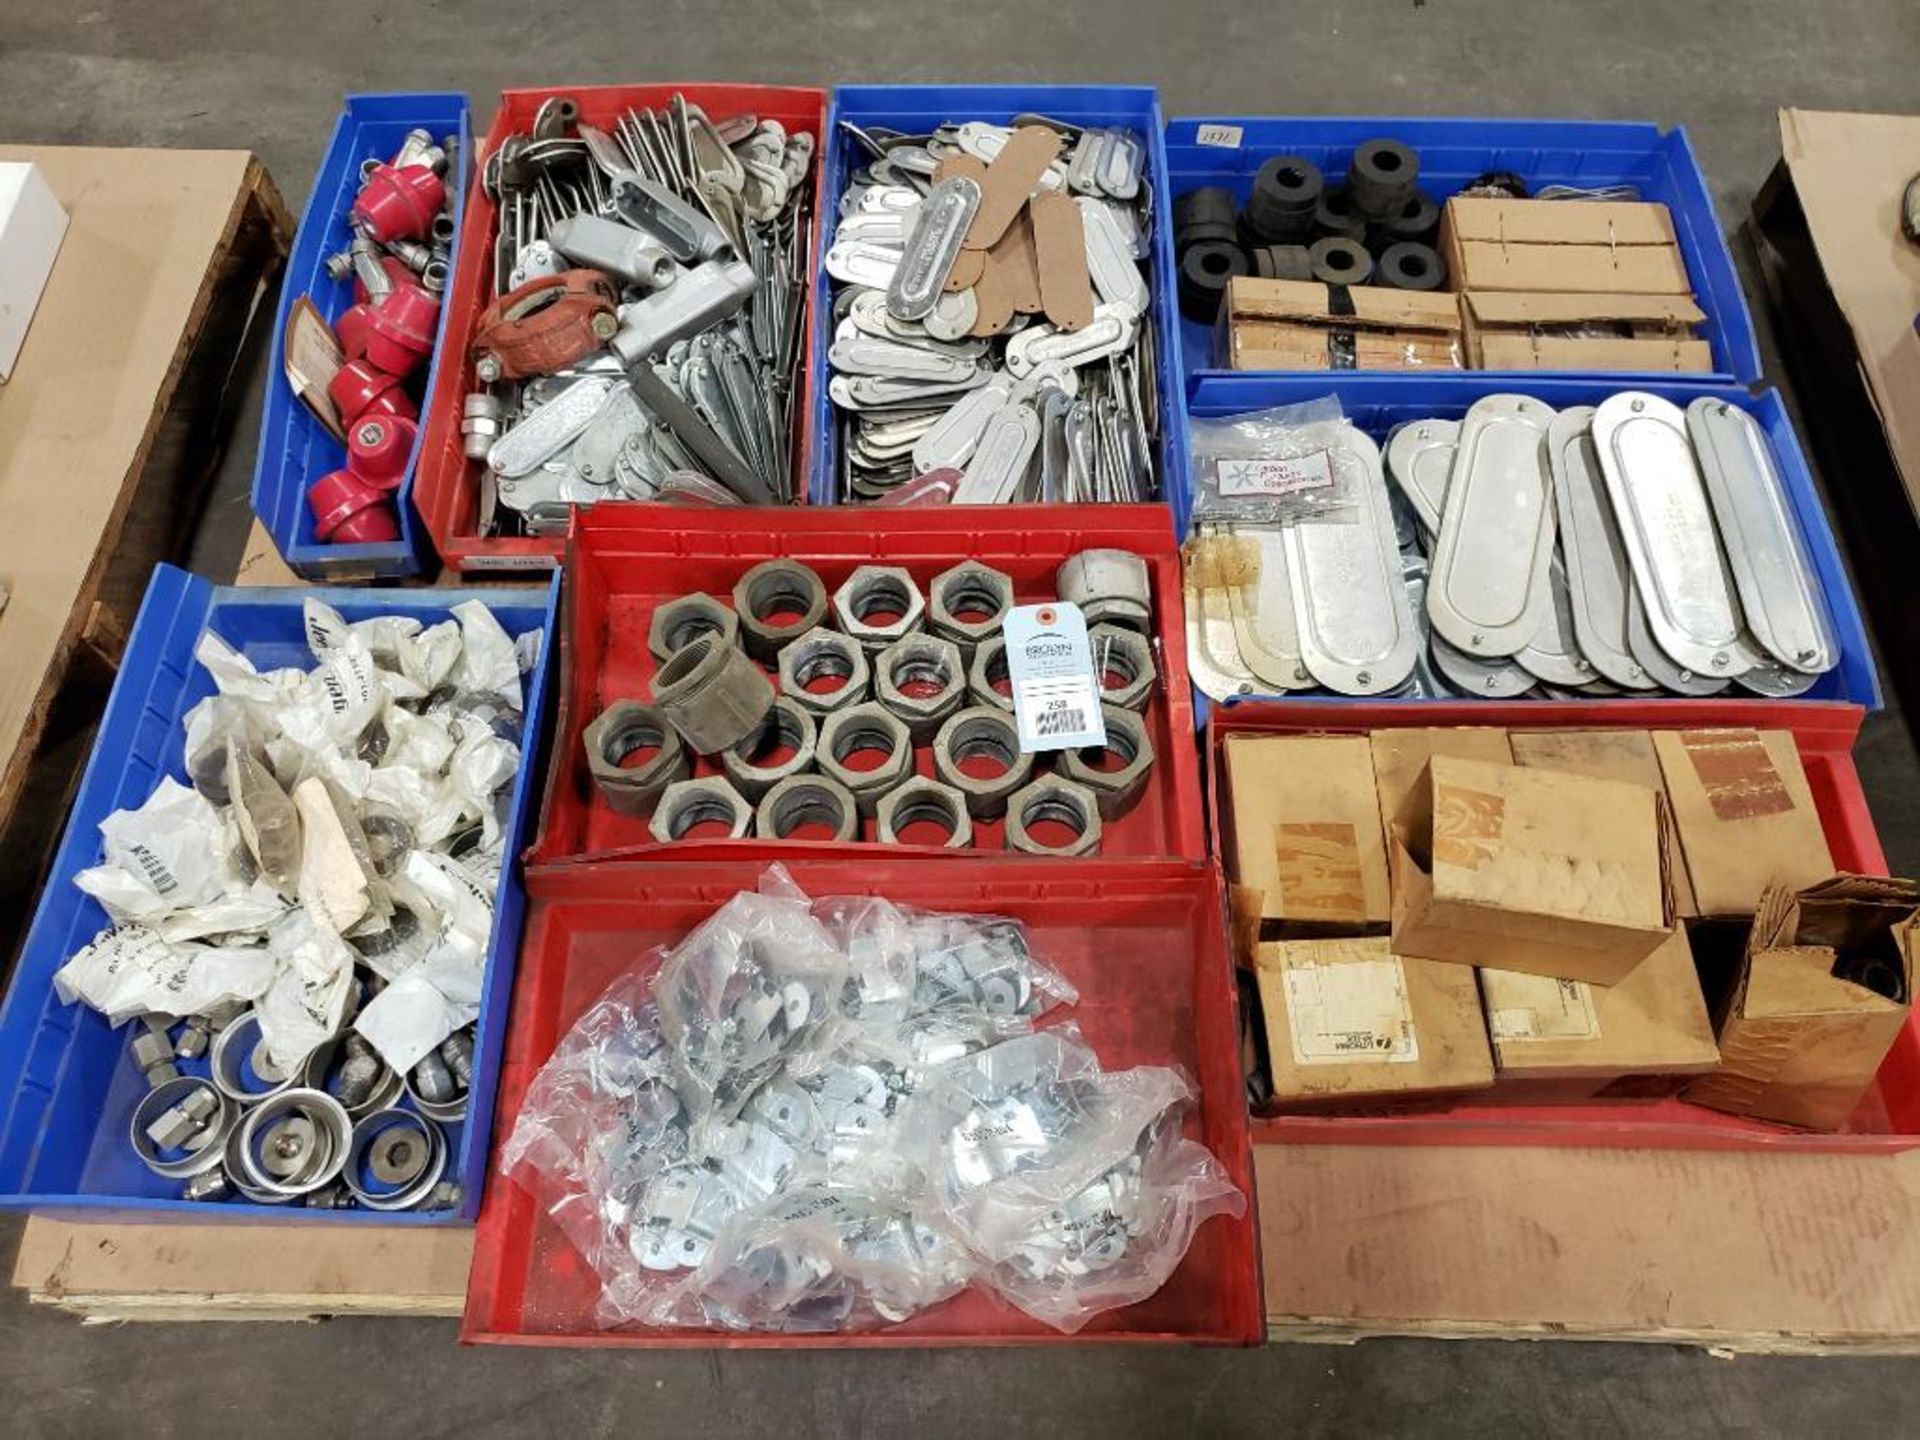 Pallet of assorted replacement parts. Conduit, fittings, covers.